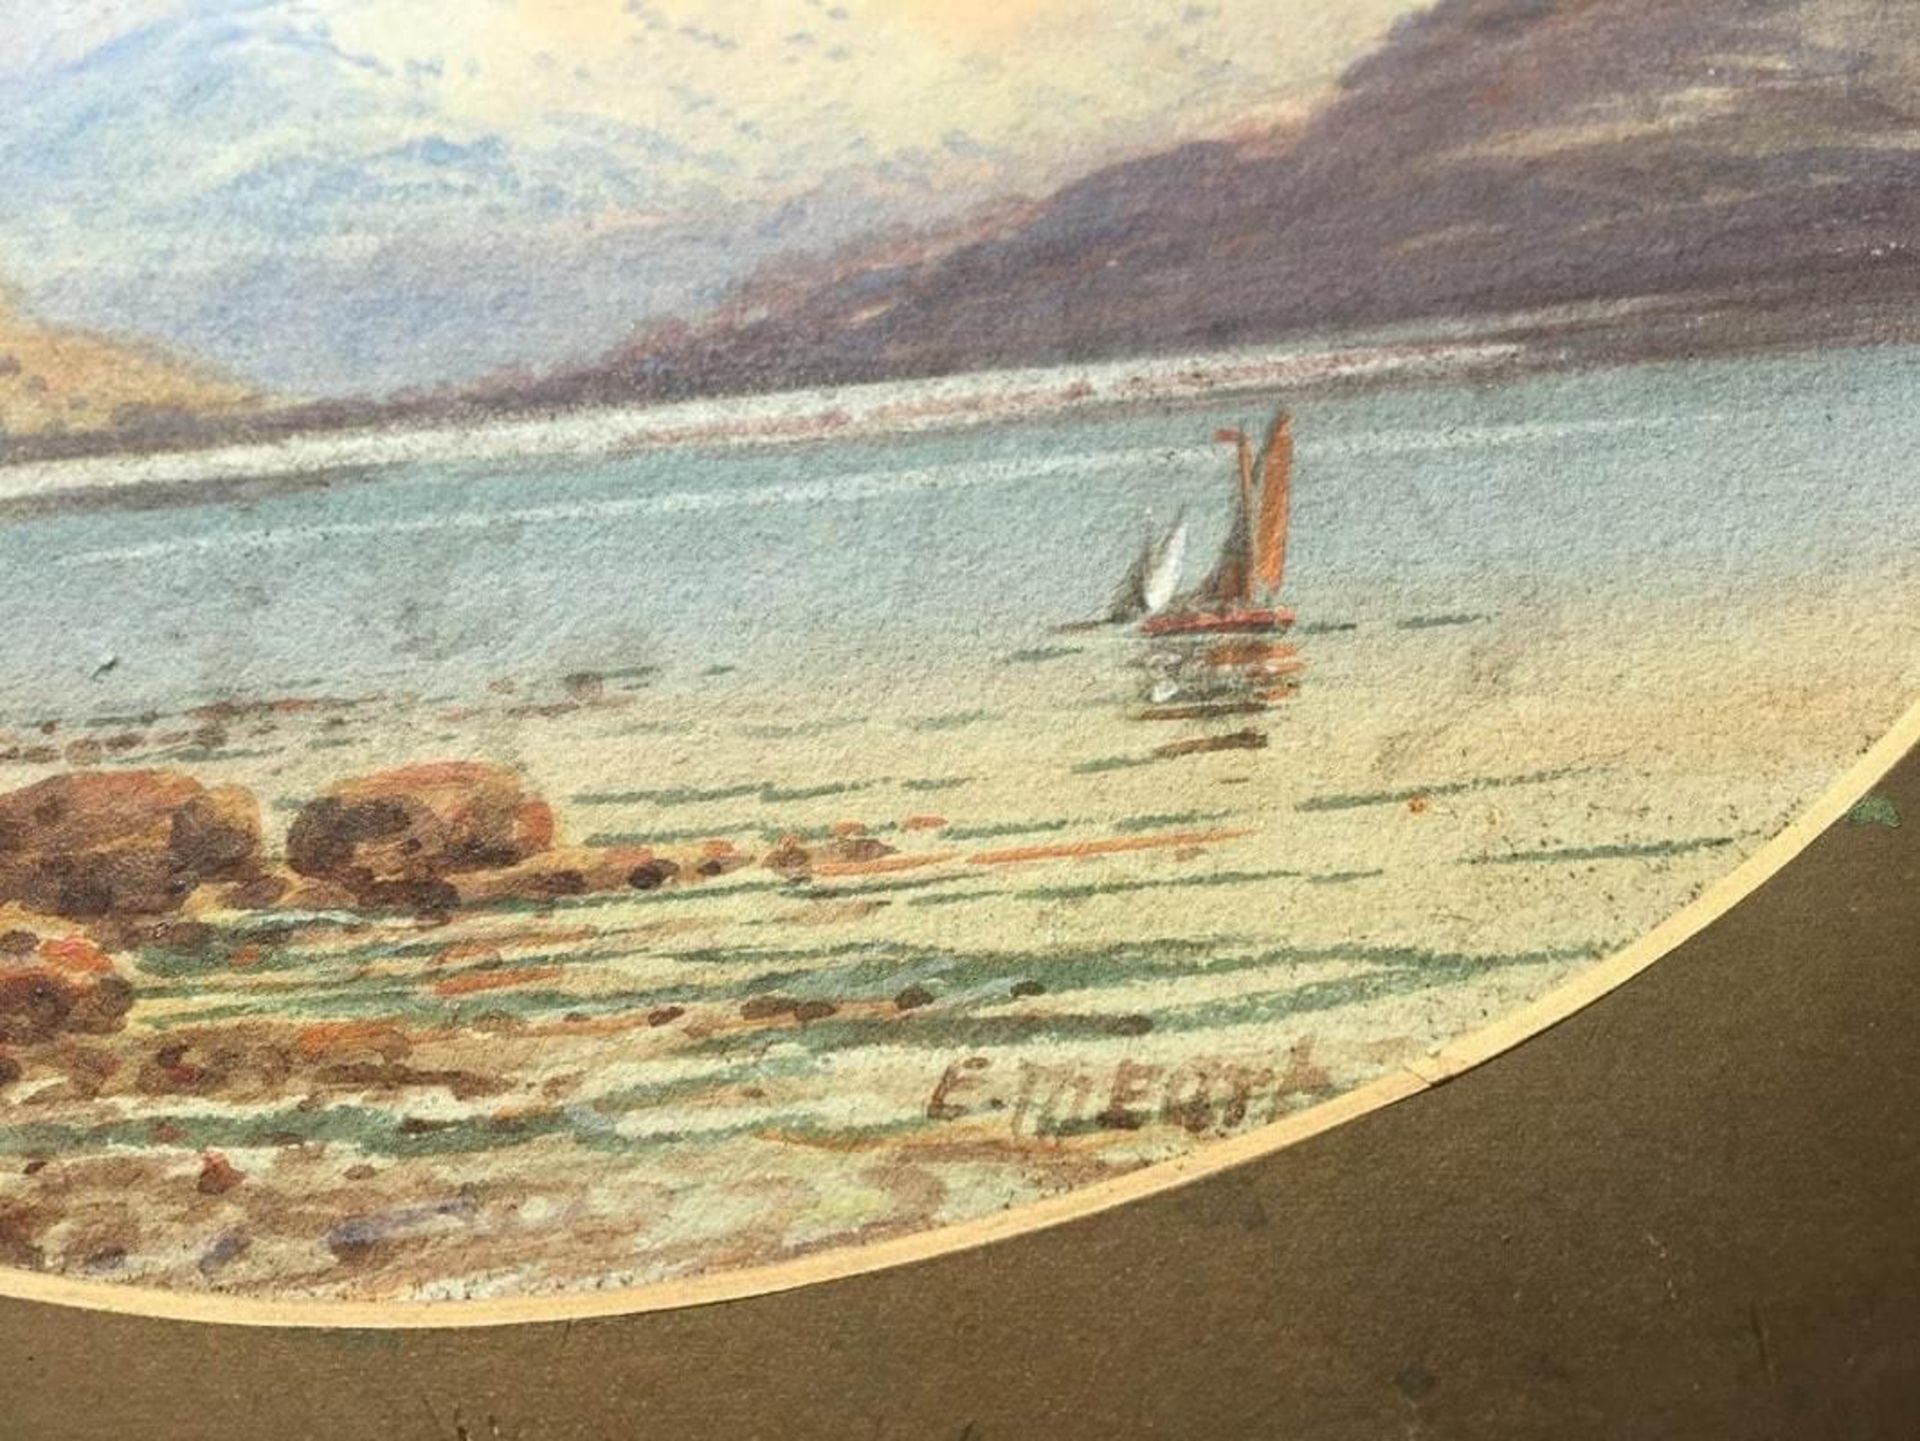 Antique watercolour painting of a beach or coastal scene with indistinct signature - possibly EM - Image 2 of 2